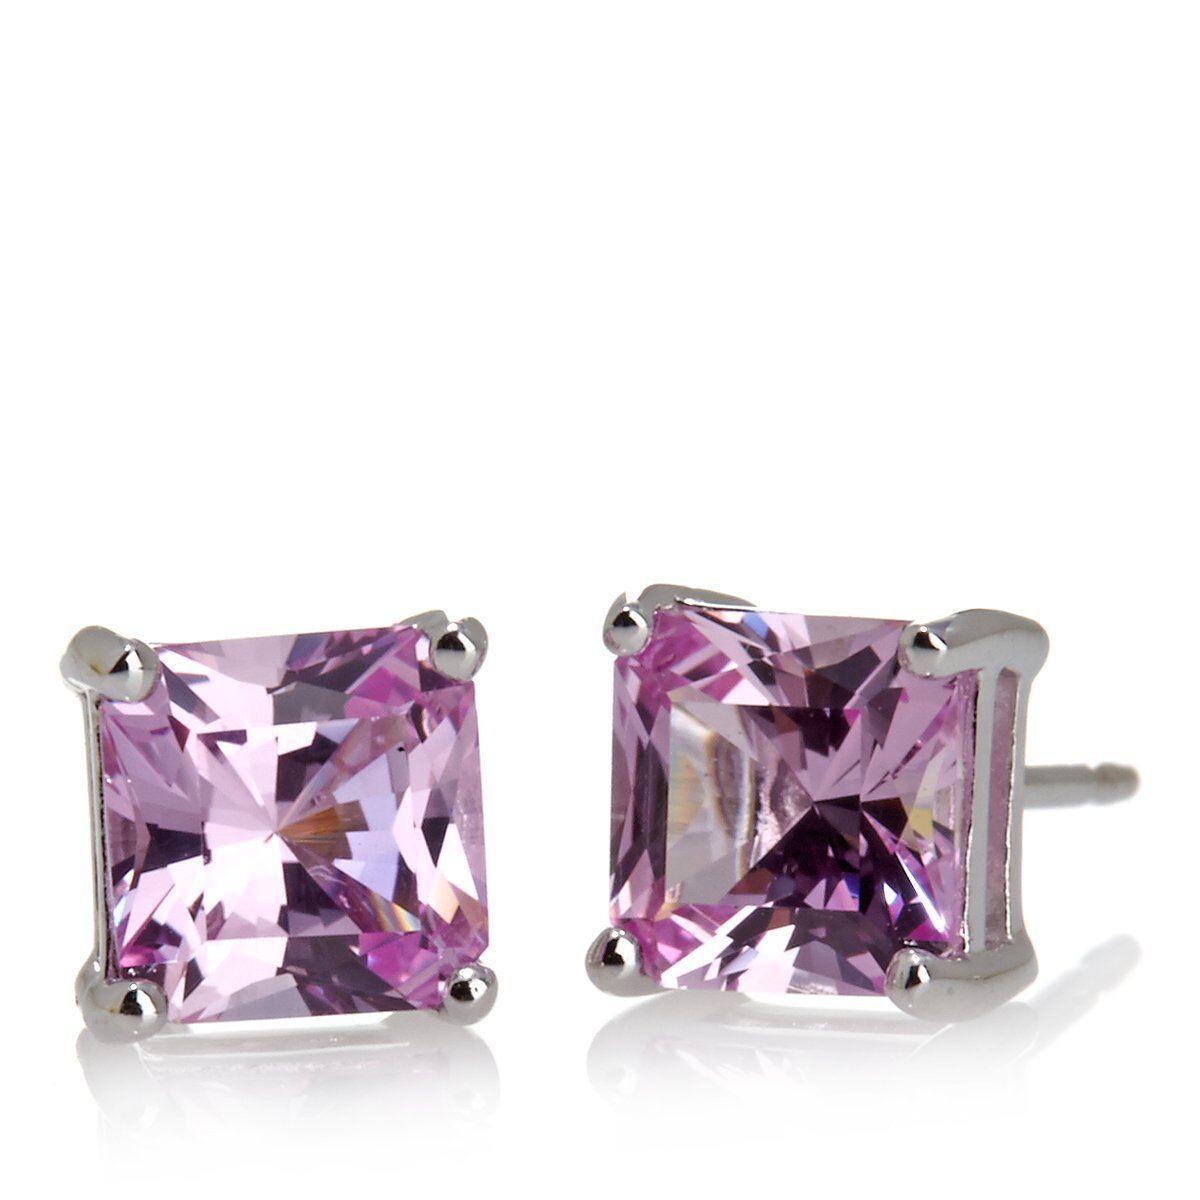 Absolute 1.4 Ct Created Pink Sapphire Princess-Cut 4-Prong Stud Earrings Hsn